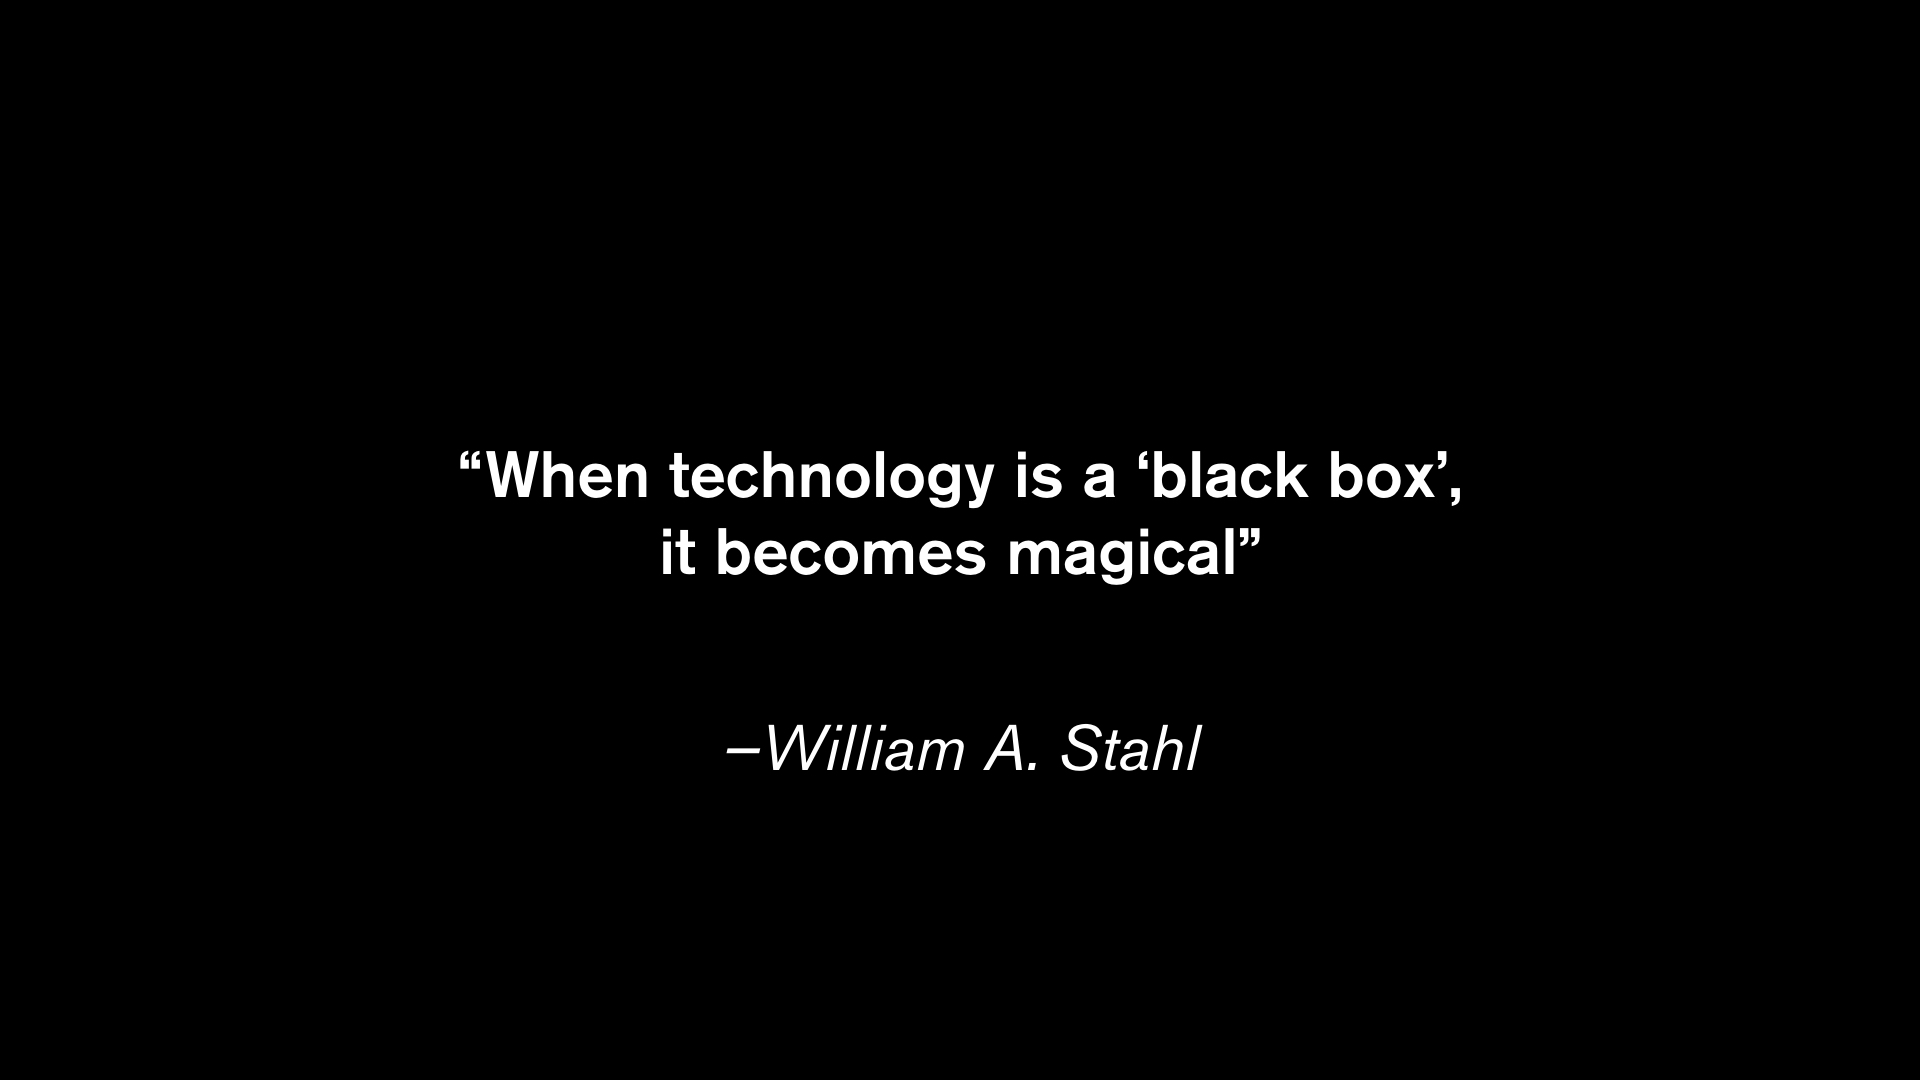 “When technology is a ‘black box’, it becomes magical” - Stahl